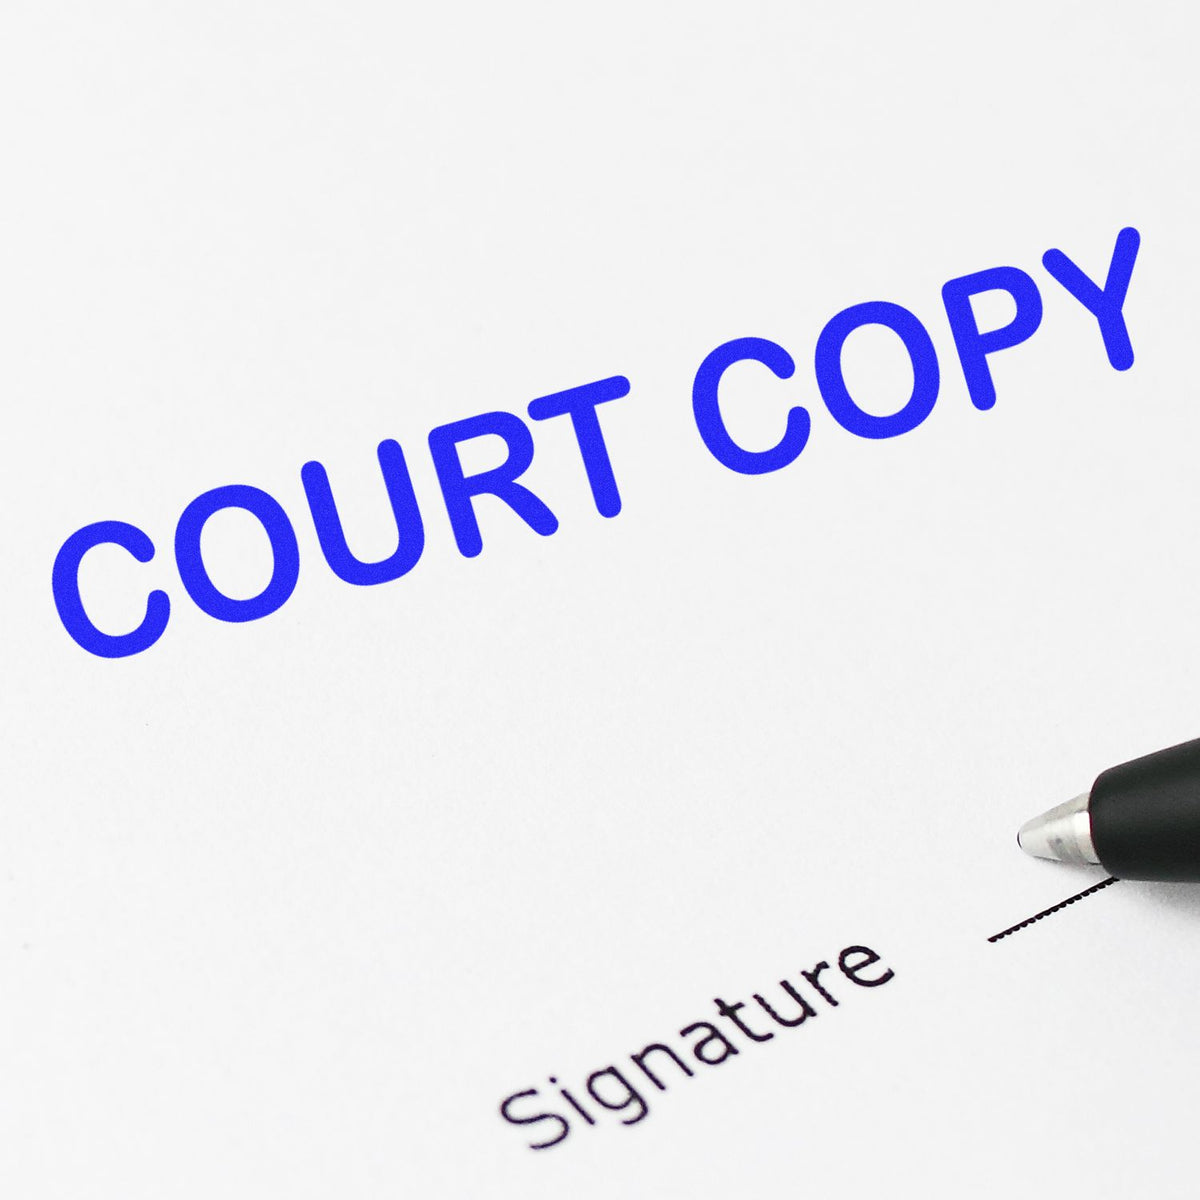 Large Court Copy Rubber Stamp In Use Photo